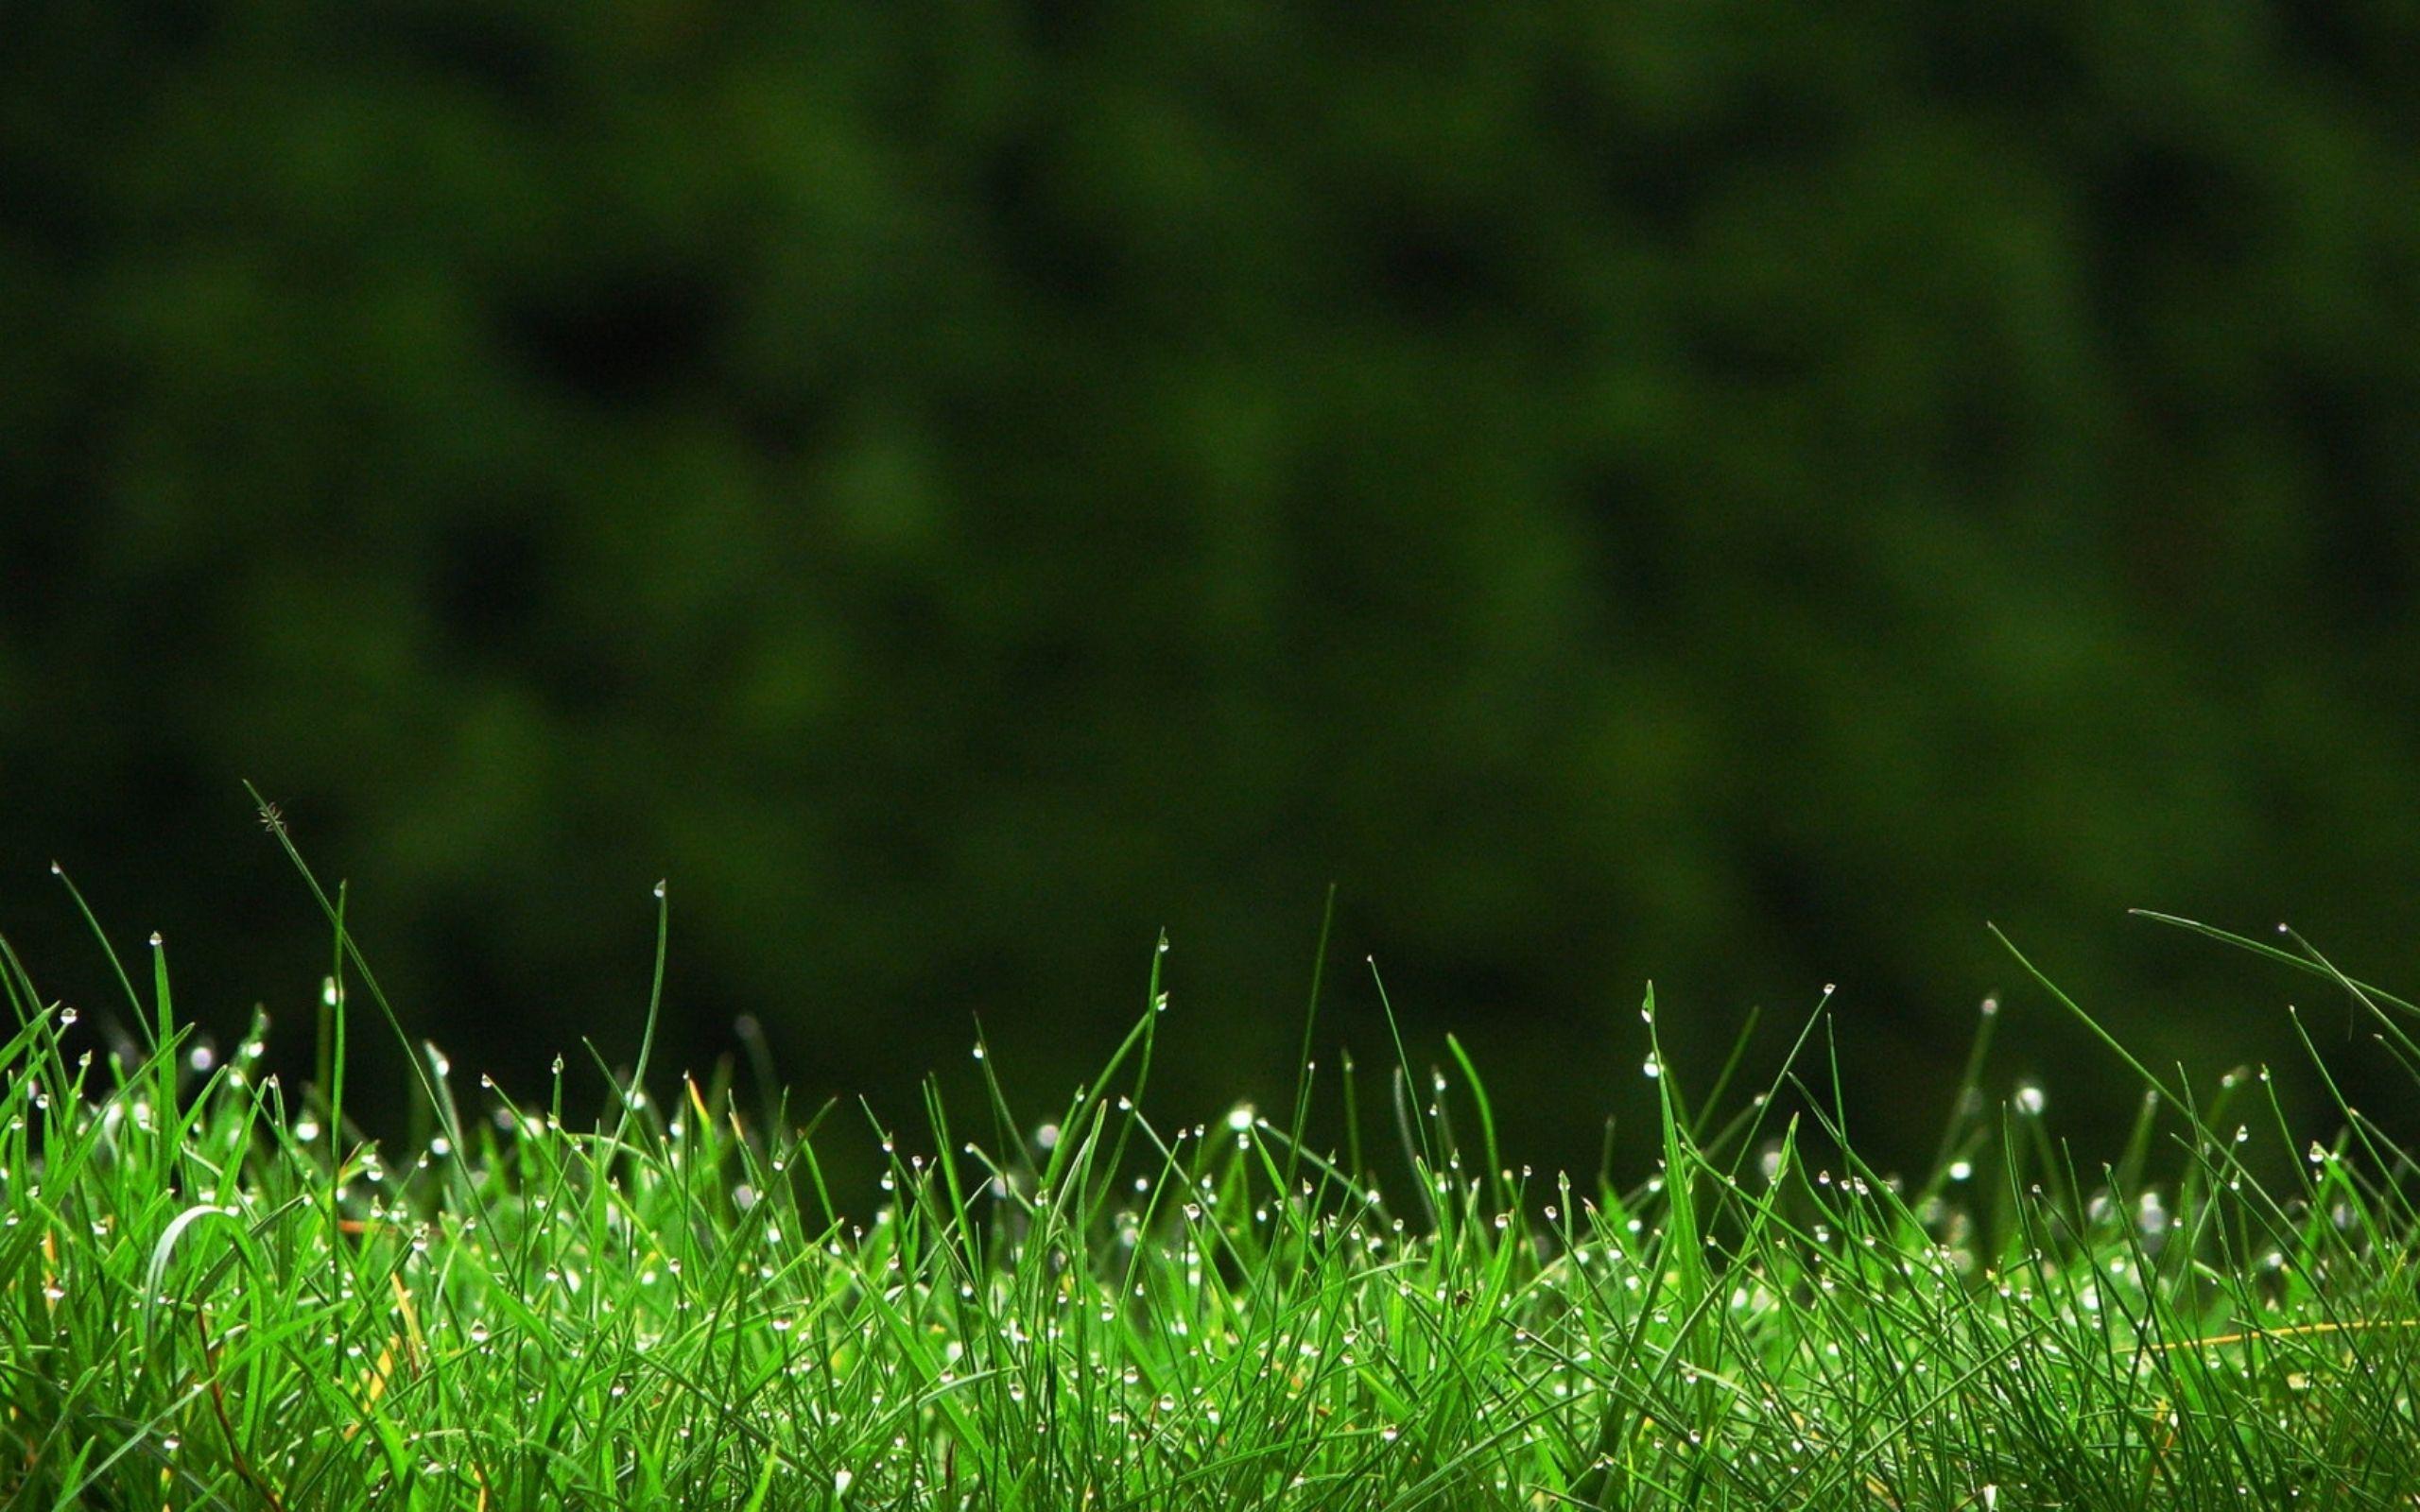 Green Grass wallpaper HD download. Photography in 2019